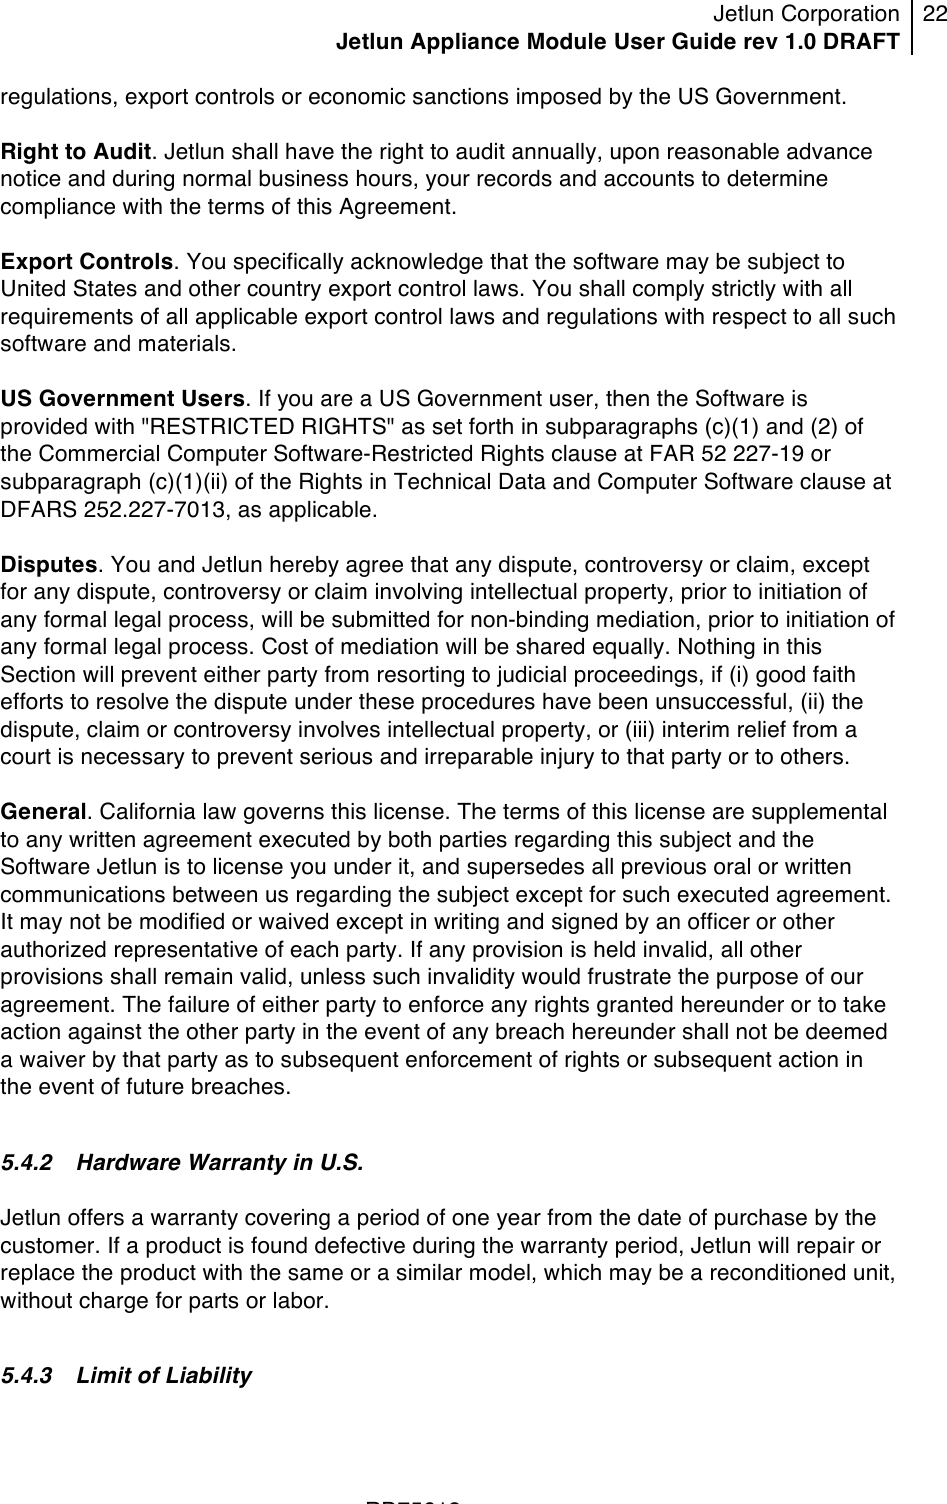 Jetlun Corporation Jetlun Appliance Module User Guide rev 1.0 DRAFT 22   !!!RD75613 !regulations, export controls or economic sanctions imposed by the US Government.  Right to Audit. Jetlun shall have the right to audit annually, upon reasonable advance notice and during normal business hours, your records and accounts to determine compliance with the terms of this Agreement.  Export Controls. You specifically acknowledge that the software may be subject to United States and other country export control laws. You shall comply strictly with all requirements of all applicable export control laws and regulations with respect to all such software and materials.  US Government Users. If you are a US Government user, then the Software is provided with &quot;RESTRICTED RIGHTS&quot; as set forth in subparagraphs (c)(1) and (2) of the Commercial Computer Software-Restricted Rights clause at FAR 52 227-19 or subparagraph (c)(1)(ii) of the Rights in Technical Data and Computer Software clause at DFARS 252.227-7013, as applicable.  Disputes. You and Jetlun hereby agree that any dispute, controversy or claim, except for any dispute, controversy or claim involving intellectual property, prior to initiation of any formal legal process, will be submitted for non-binding mediation, prior to initiation of any formal legal process. Cost of mediation will be shared equally. Nothing in this Section will prevent either party from resorting to judicial proceedings, if (i) good faith efforts to resolve the dispute under these procedures have been unsuccessful, (ii) the dispute, claim or controversy involves intellectual property, or (iii) interim relief from a court is necessary to prevent serious and irreparable injury to that party or to others.  General. California law governs this license. The terms of this license are supplemental to any written agreement executed by both parties regarding this subject and the Software Jetlun is to license you under it, and supersedes all previous oral or written communications between us regarding the subject except for such executed agreement. It may not be modified or waived except in writing and signed by an officer or other authorized representative of each party. If any provision is held invalid, all other provisions shall remain valid, unless such invalidity would frustrate the purpose of our agreement. The failure of either party to enforce any rights granted hereunder or to take action against the other party in the event of any breach hereunder shall not be deemed a waiver by that party as to subsequent enforcement of rights or subsequent action in the event of future breaches.  5.4.2 Hardware Warranty in U.S.  Jetlun offers a warranty covering a period of one year from the date of purchase by the customer. If a product is found defective during the warranty period, Jetlun will repair or replace the product with the same or a similar model, which may be a reconditioned unit, without charge for parts or labor.  5.4.3 Limit of Liability  